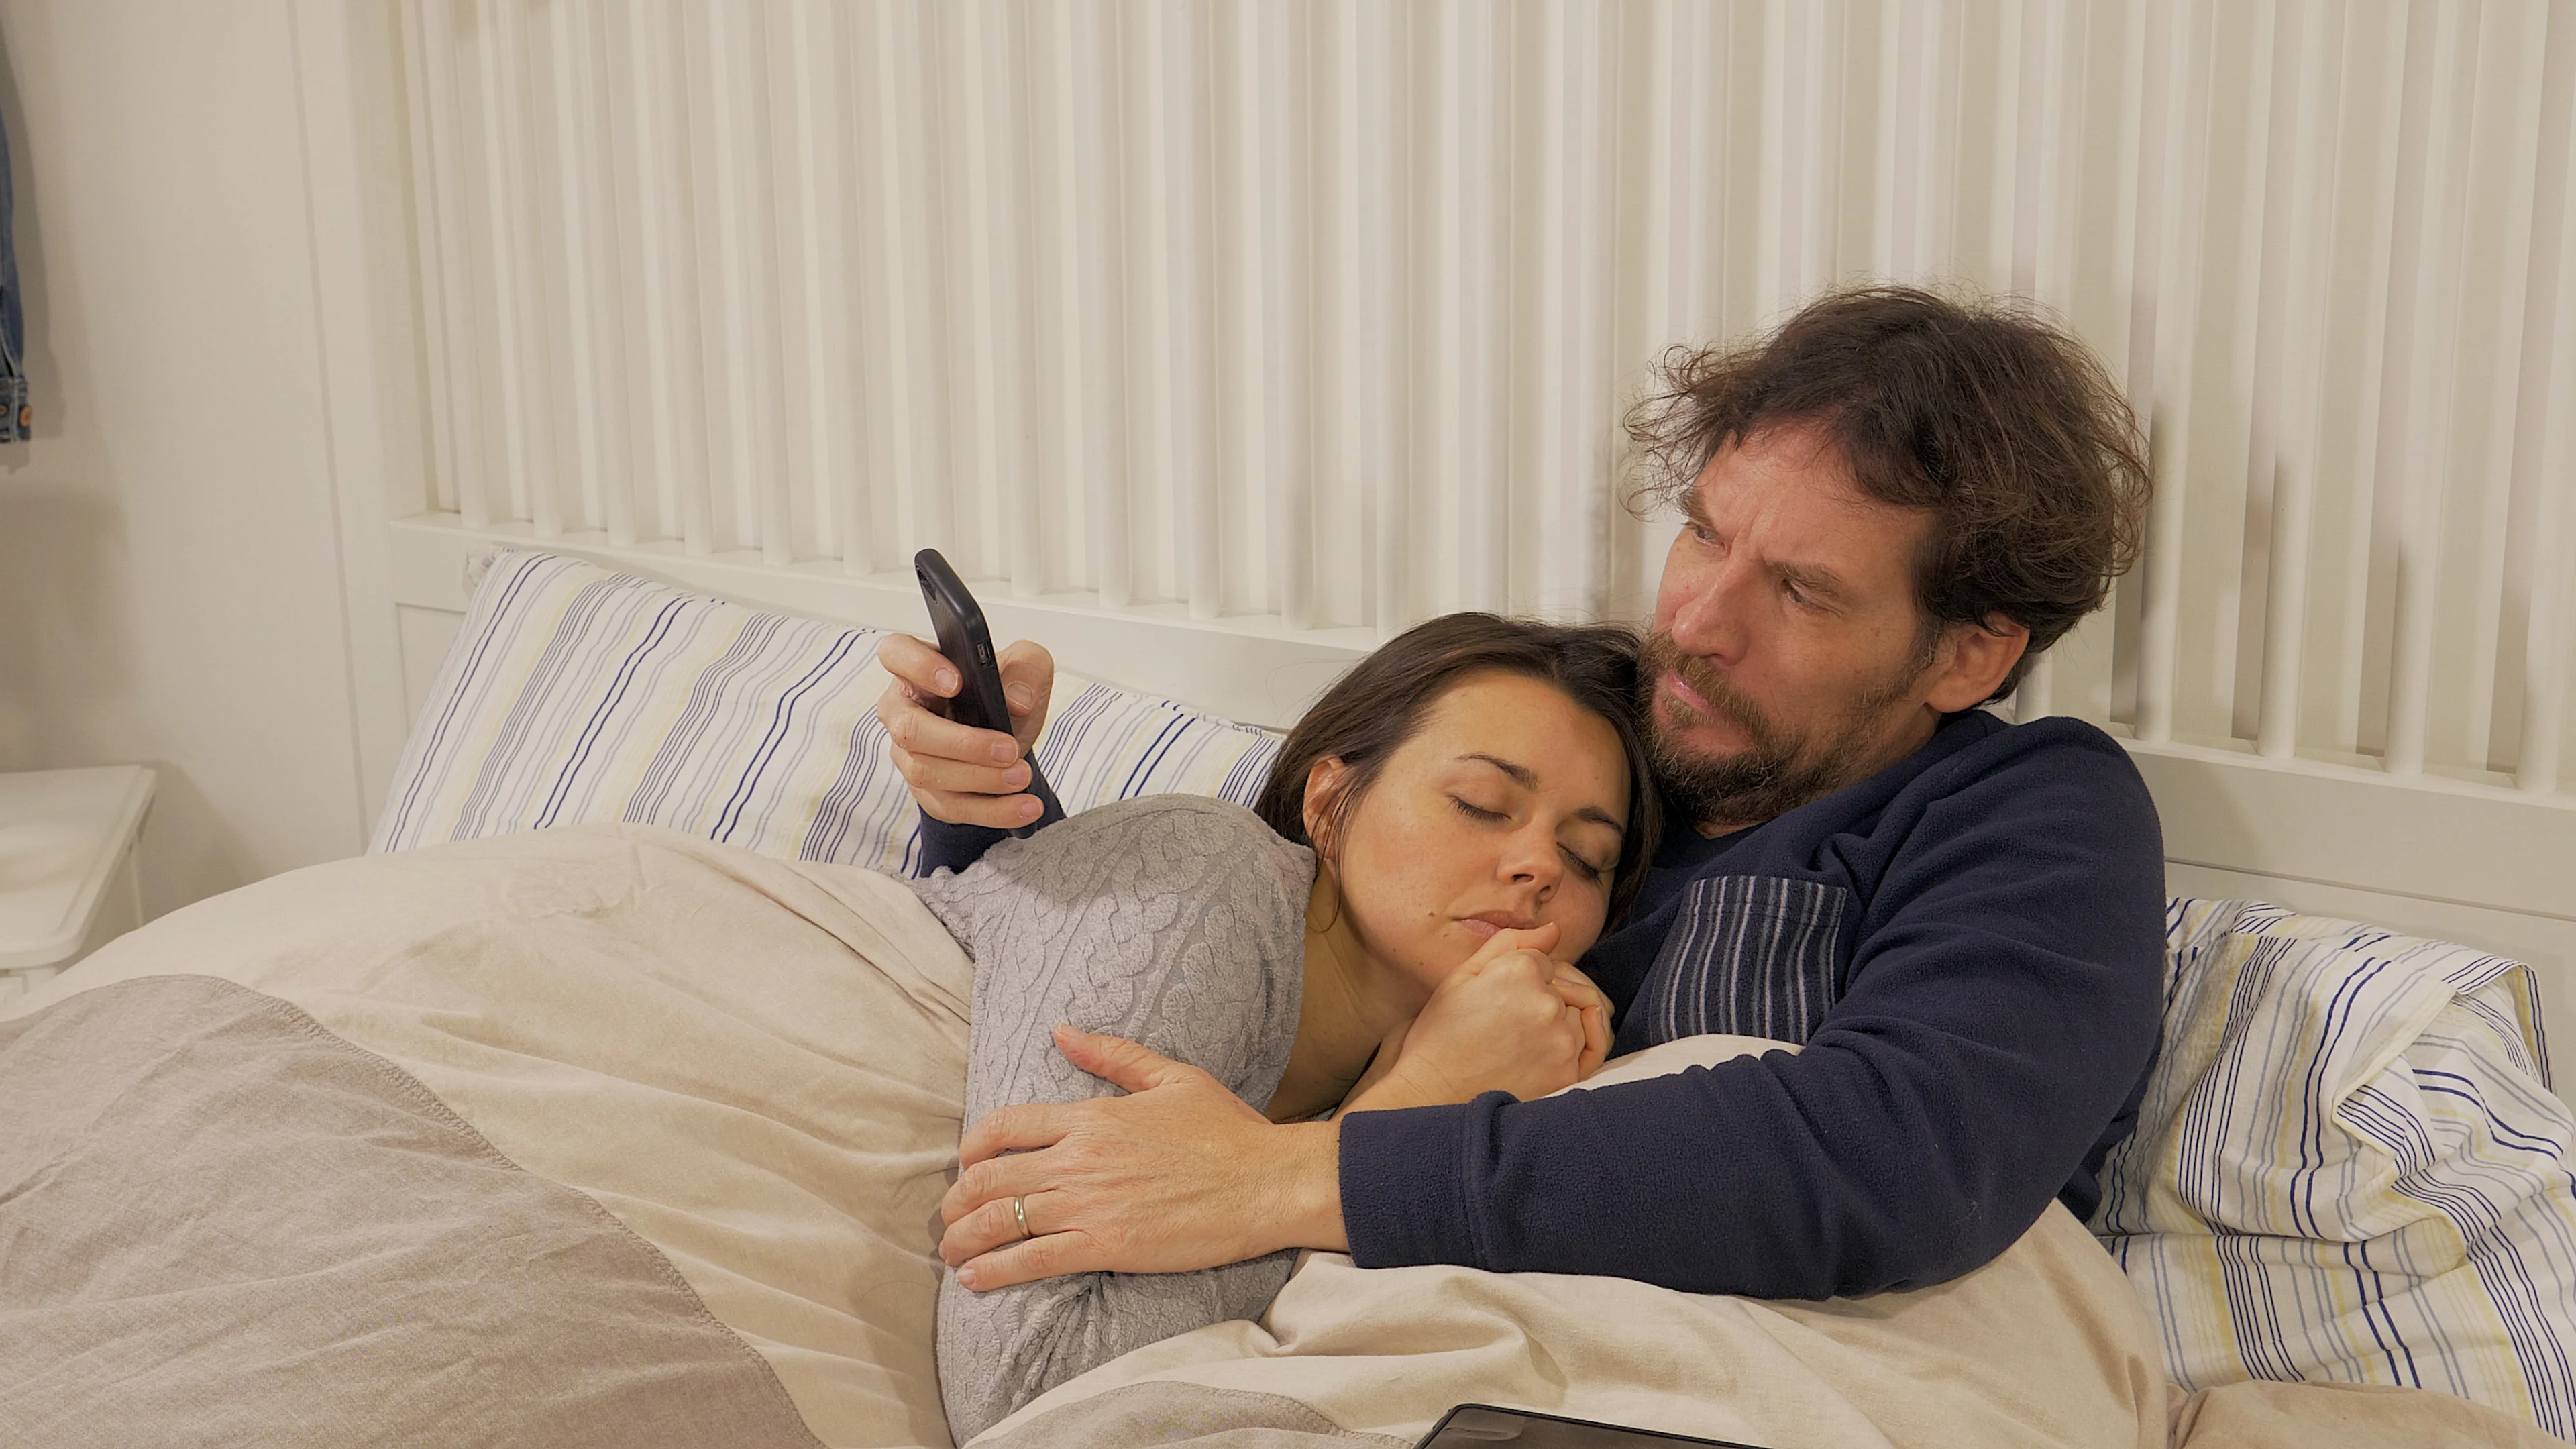 Husband cheating on sleeping wife in bed with cell phone photo